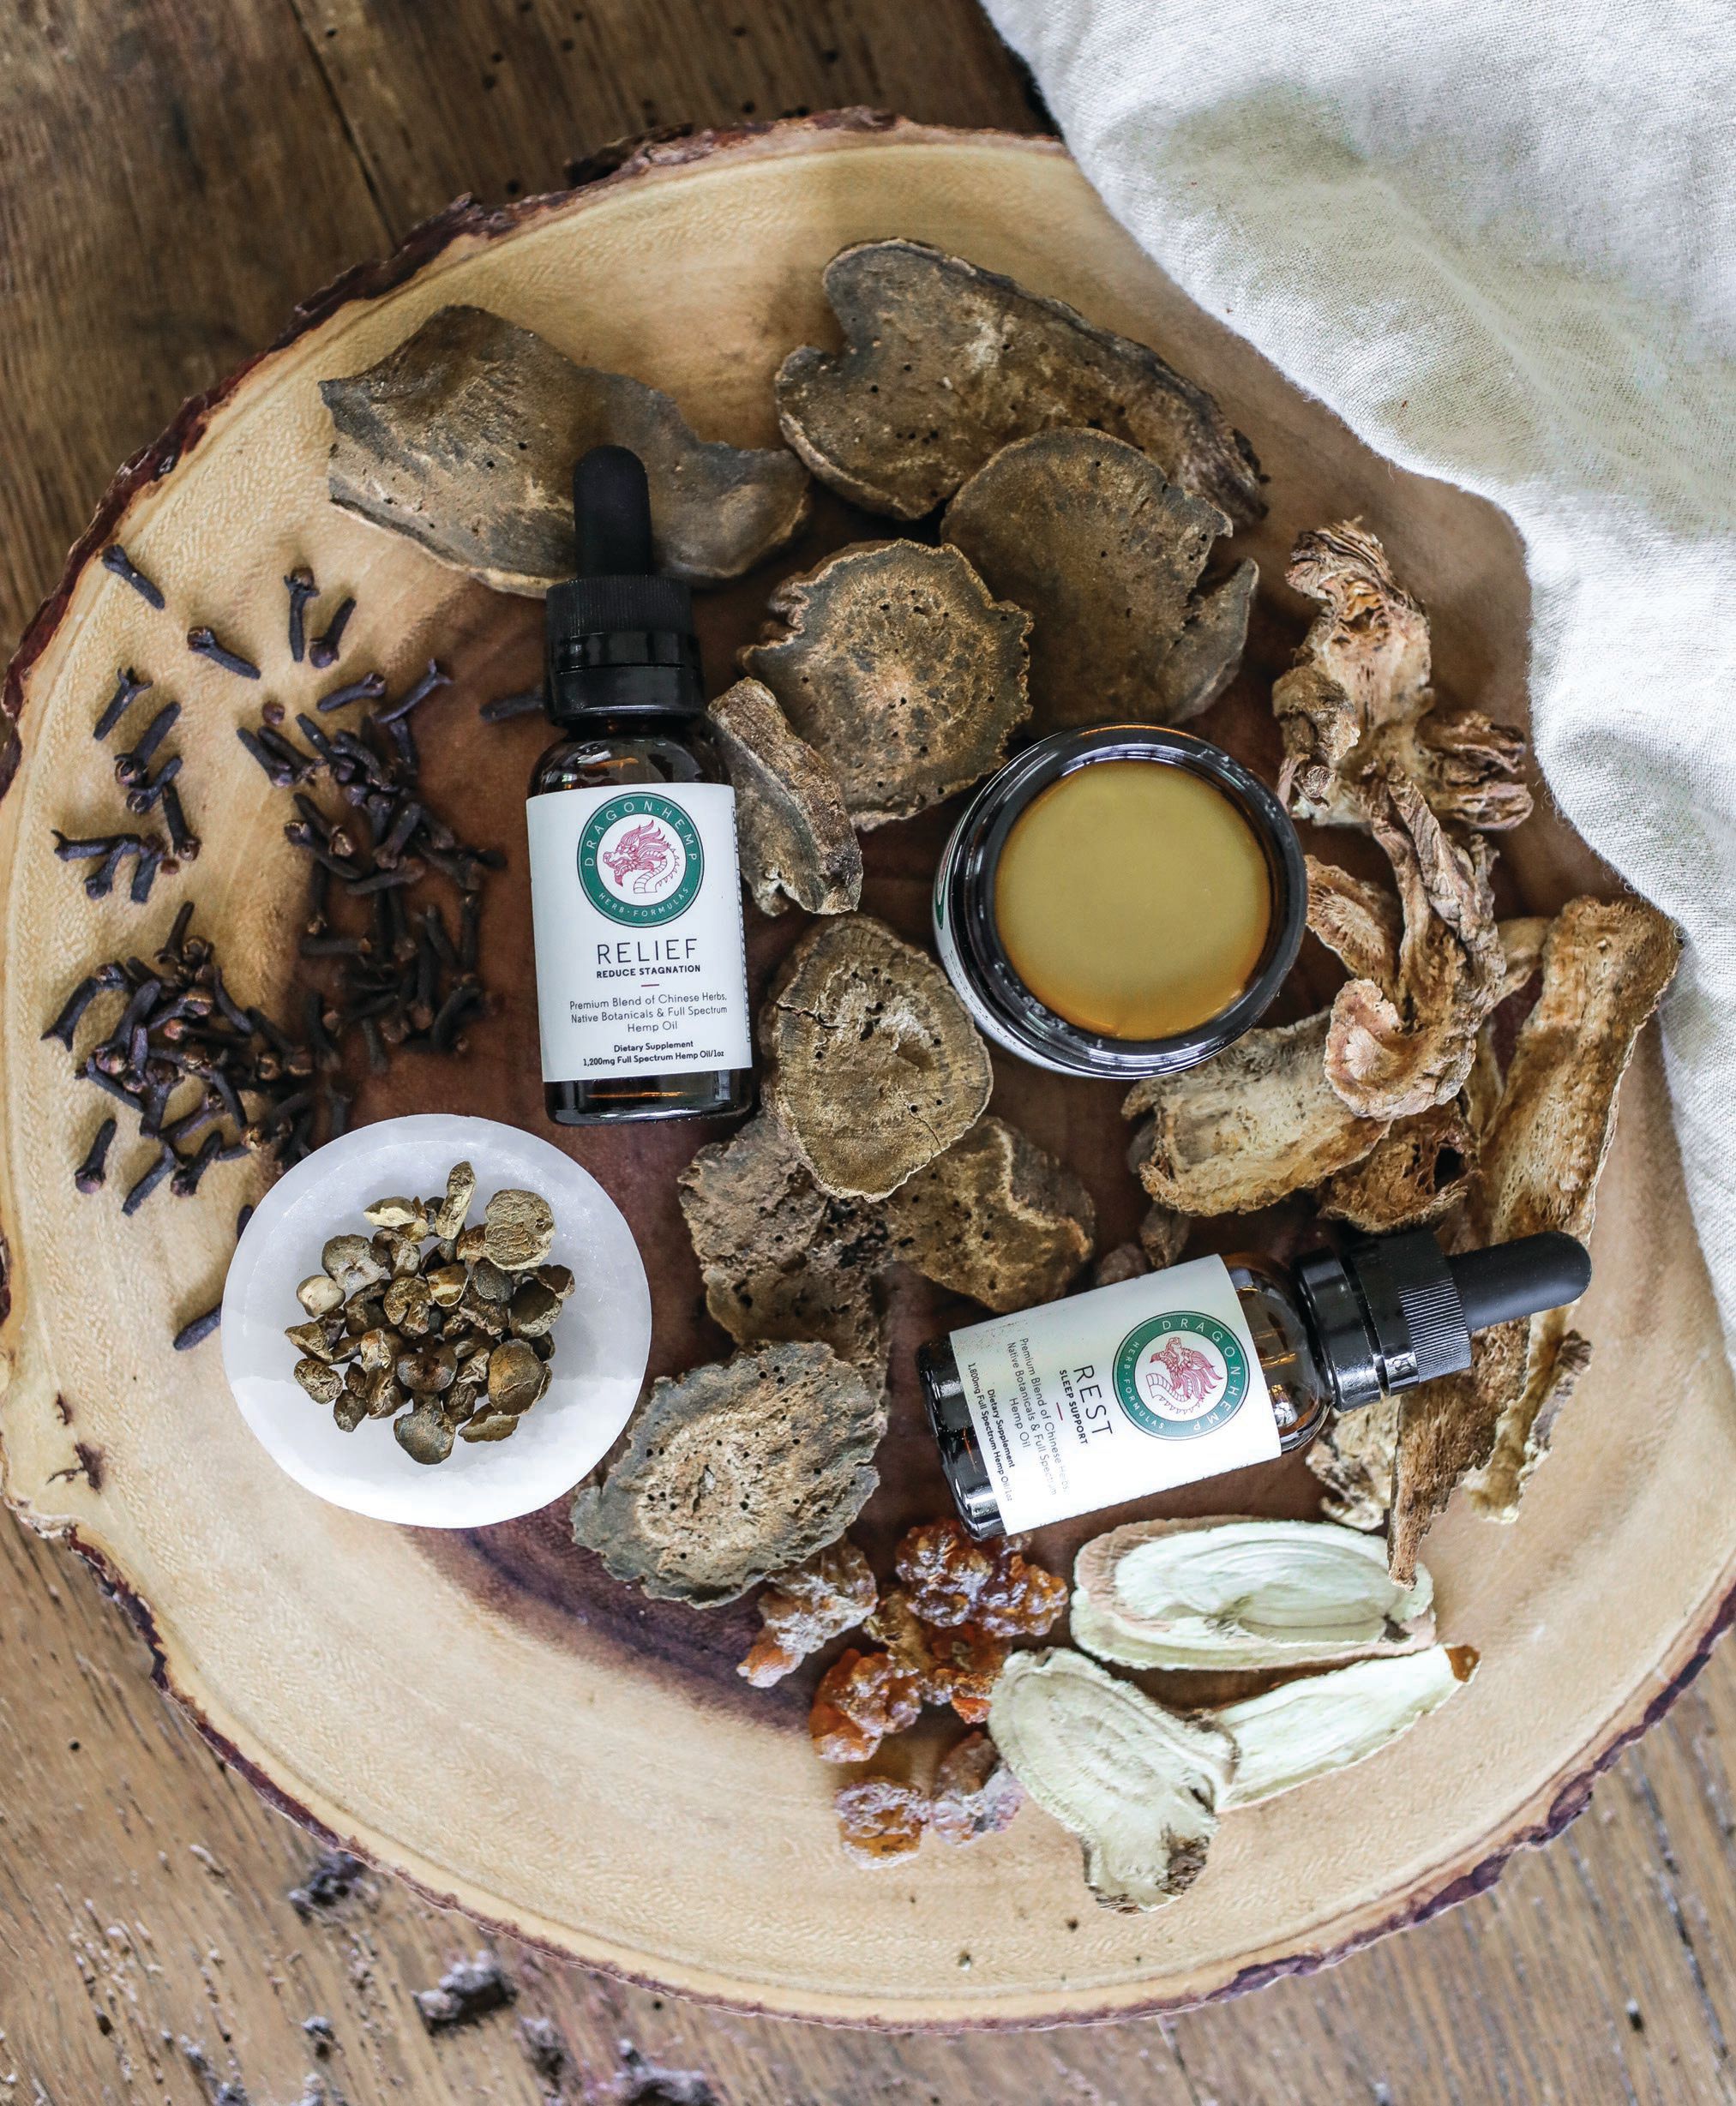 Shop an array of artisan-crafted, therapeutic products. PHOTO BY ERIC STRIFFLER